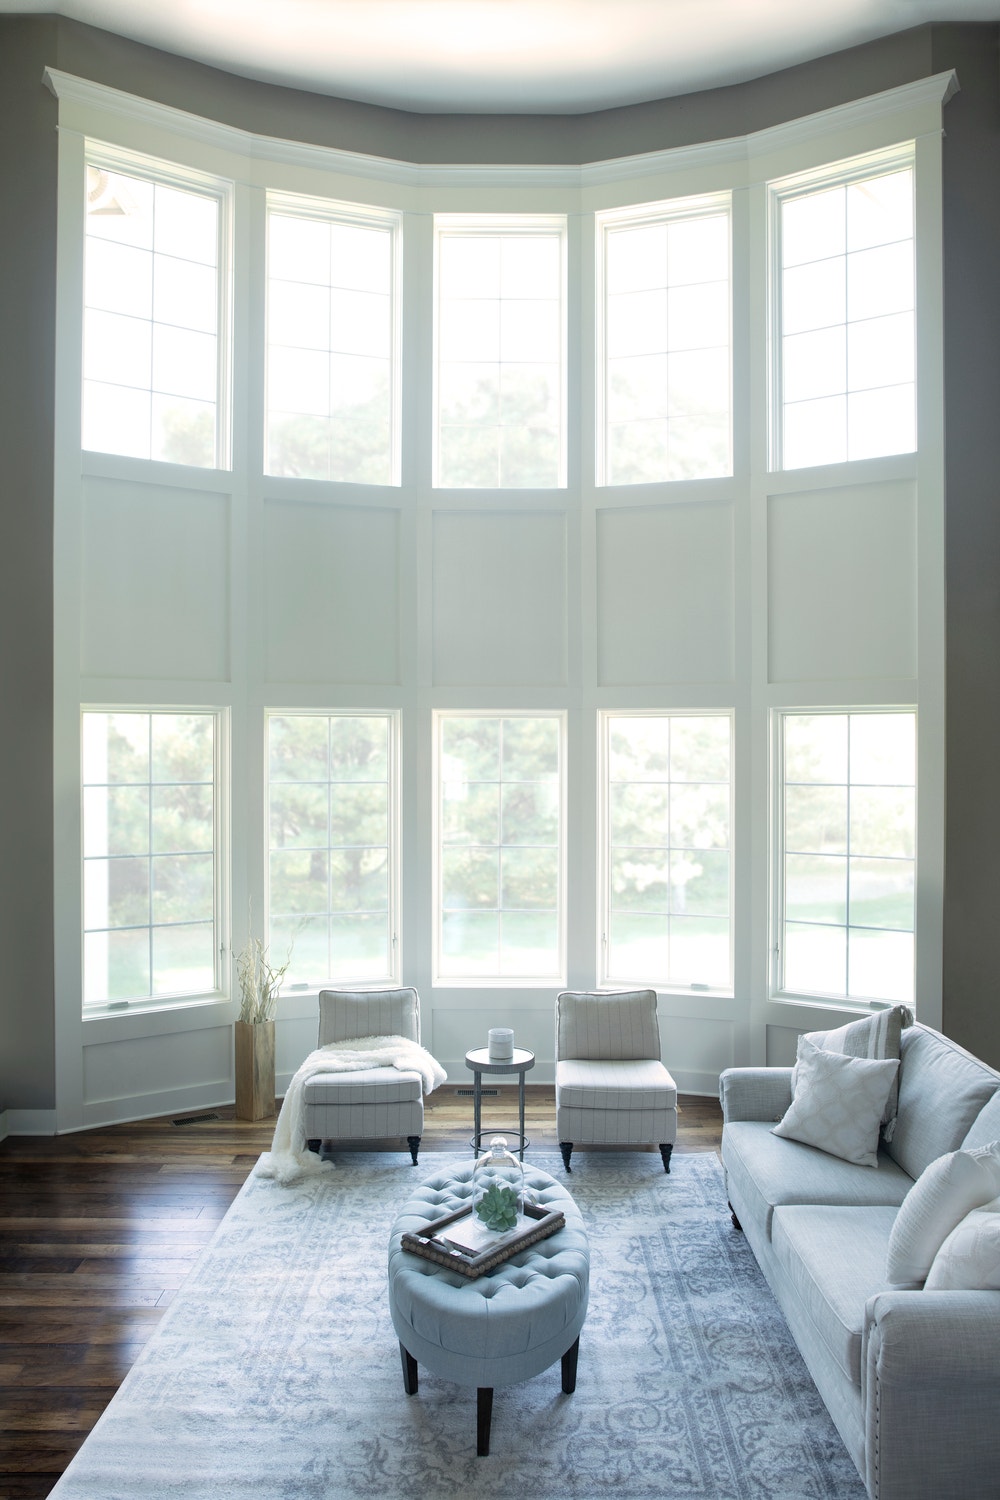 Stacked casement windows create floor-to-ceiling window wall in a living room